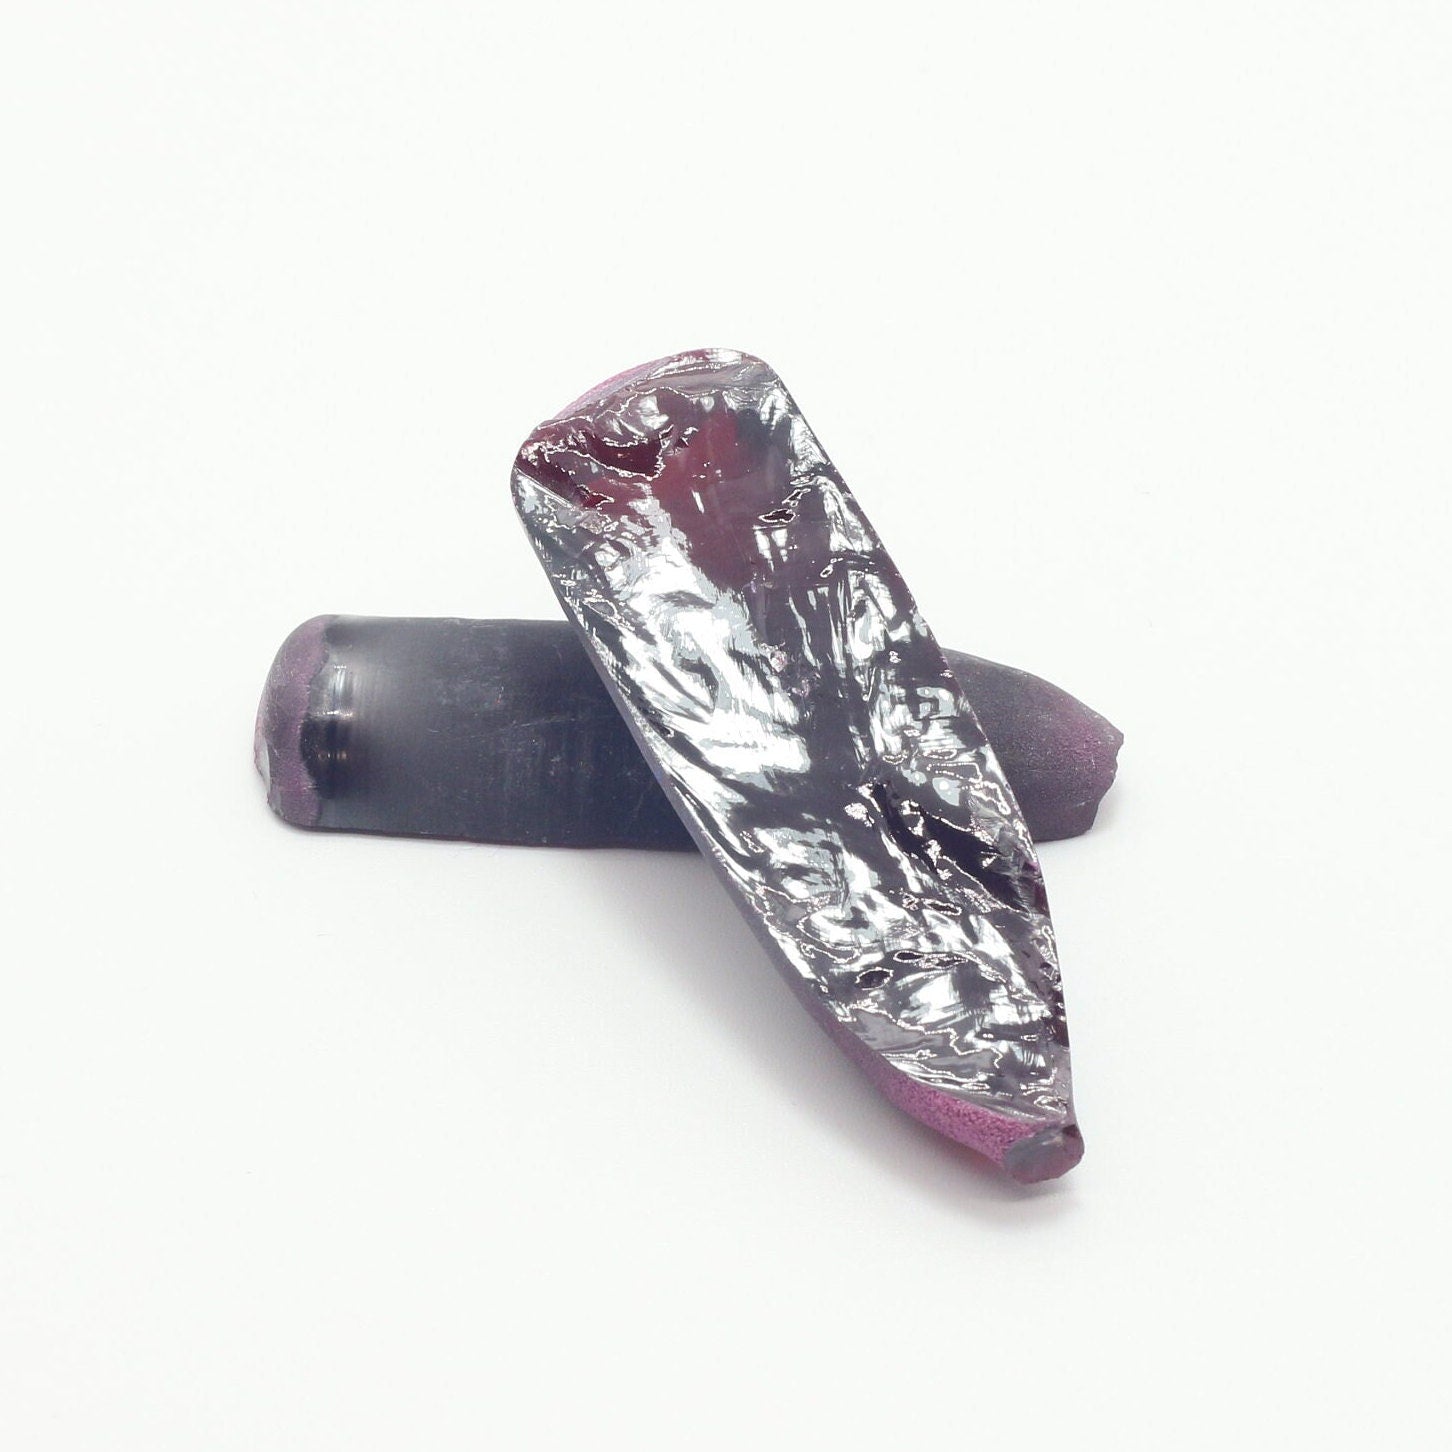 Very Dark Ruby Red #9 Lab Created Corundum Sapphire Faceting Rough for Gem Cutting - Various Sizes - Split Boule